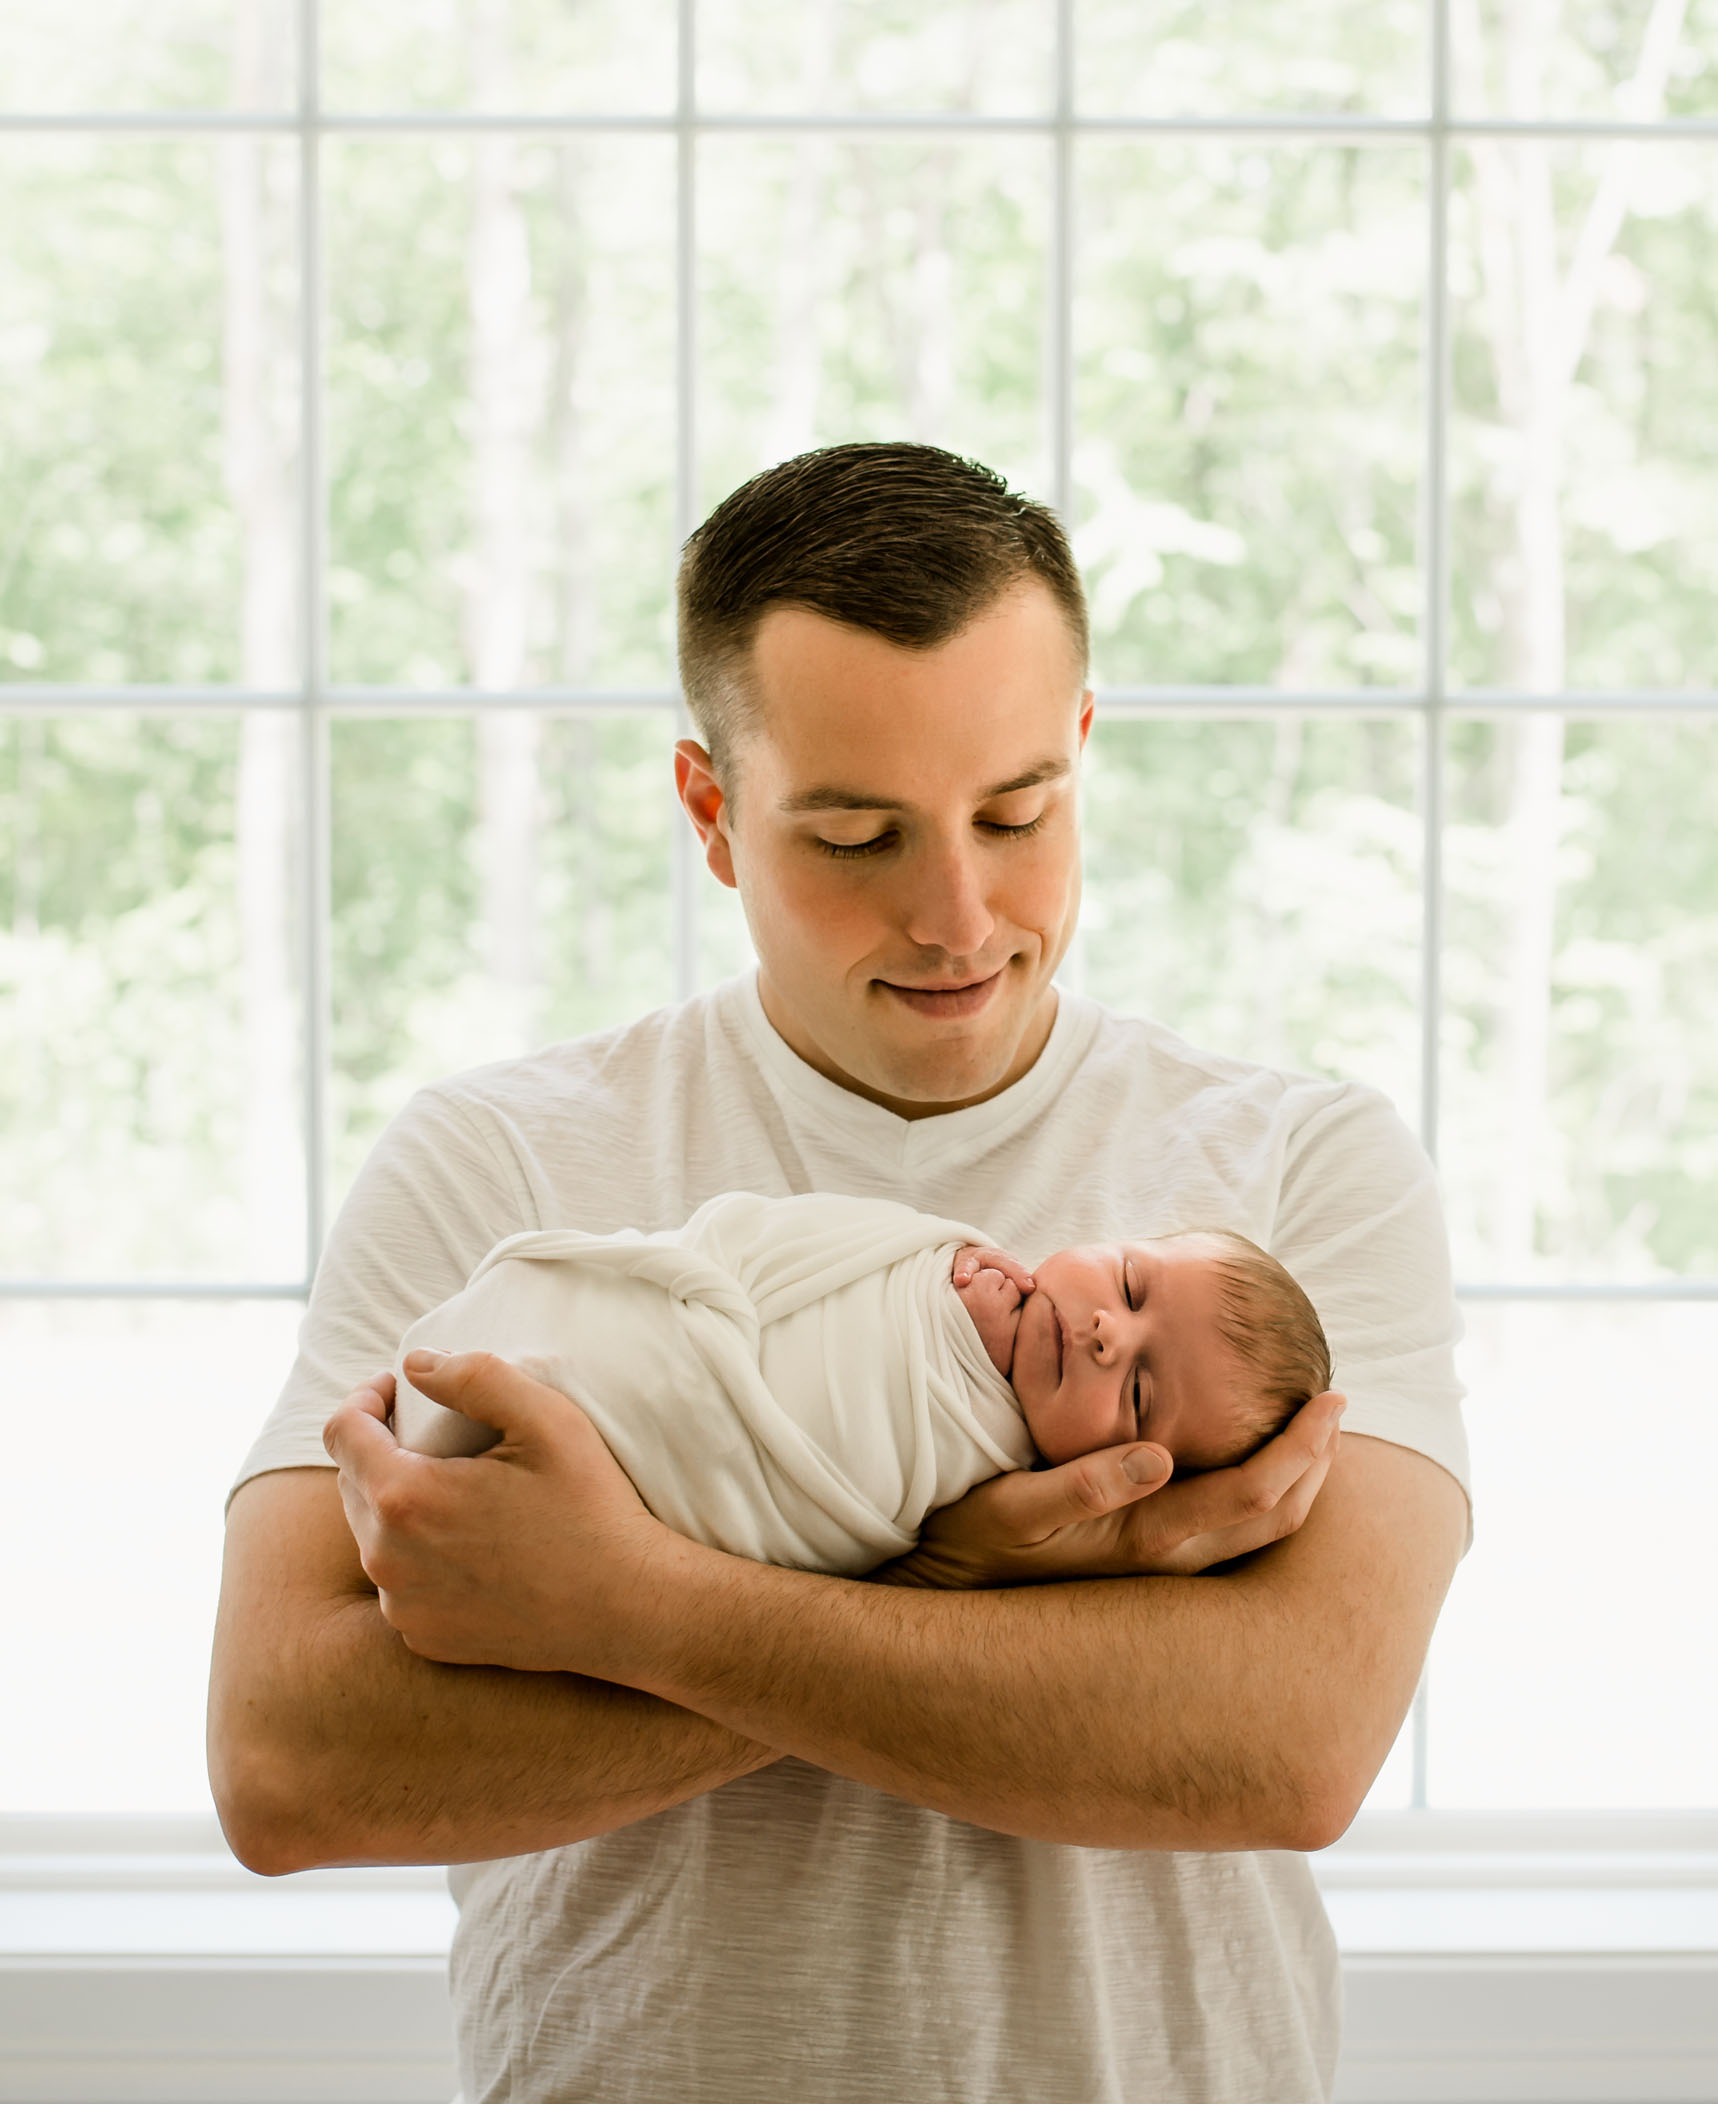 Dad holding baby in his arms in front of window